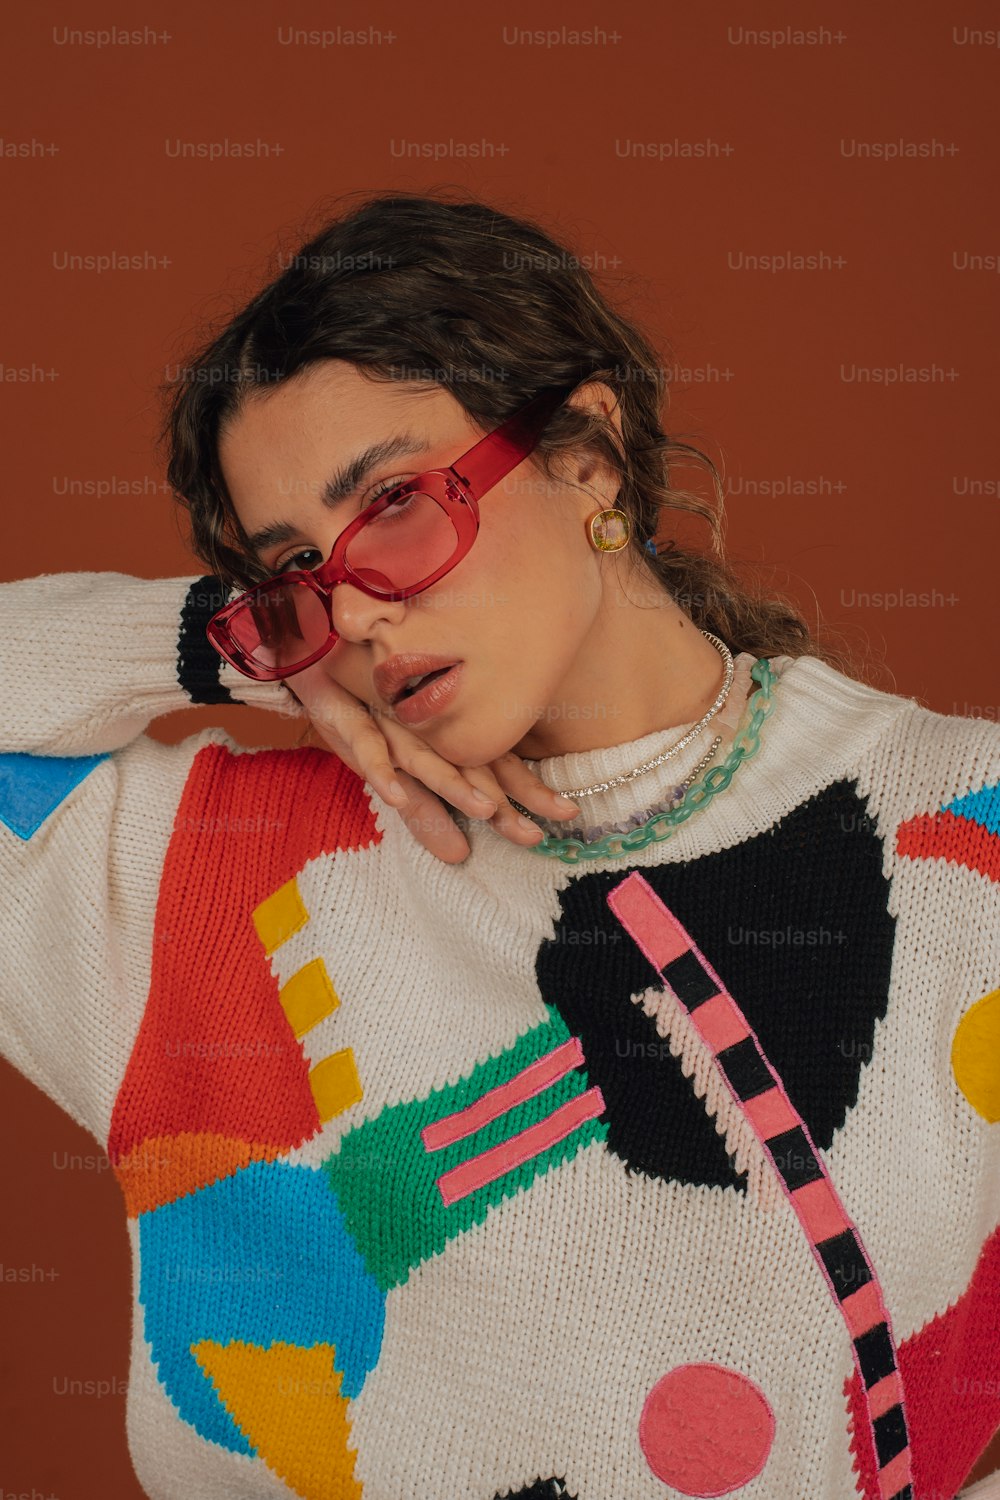 a woman wearing a colorful sweater and glasses